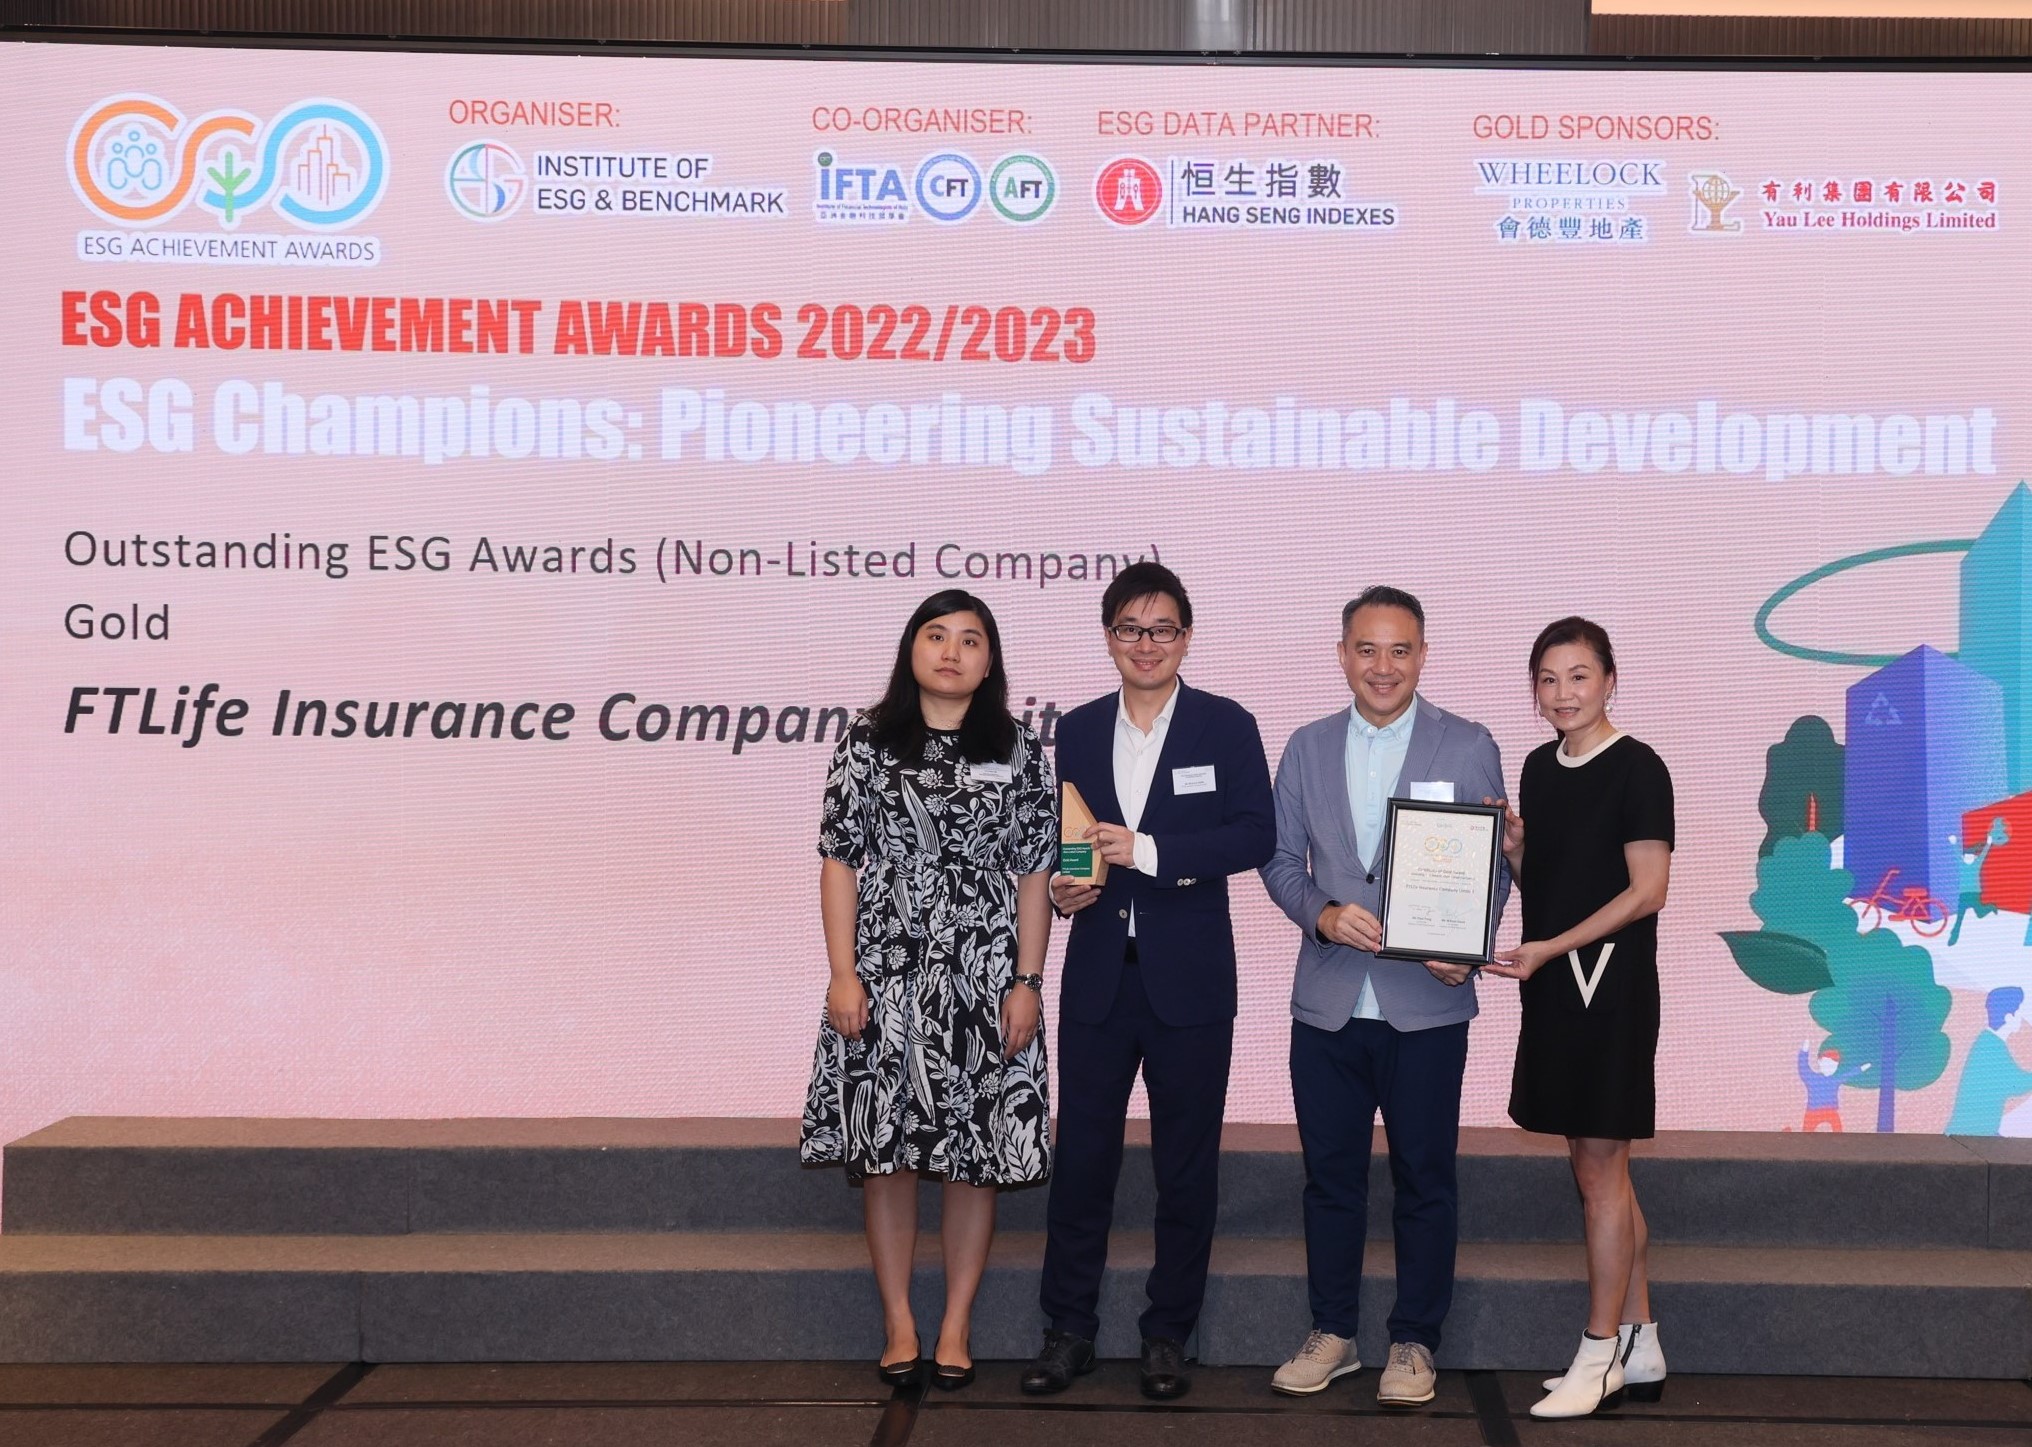 FTLife brings home the Outstanding ESG Awards (Non-Listed Company) – Gold by the ESG Achievement Awards 2022/2023 for the 2nd consecutive year